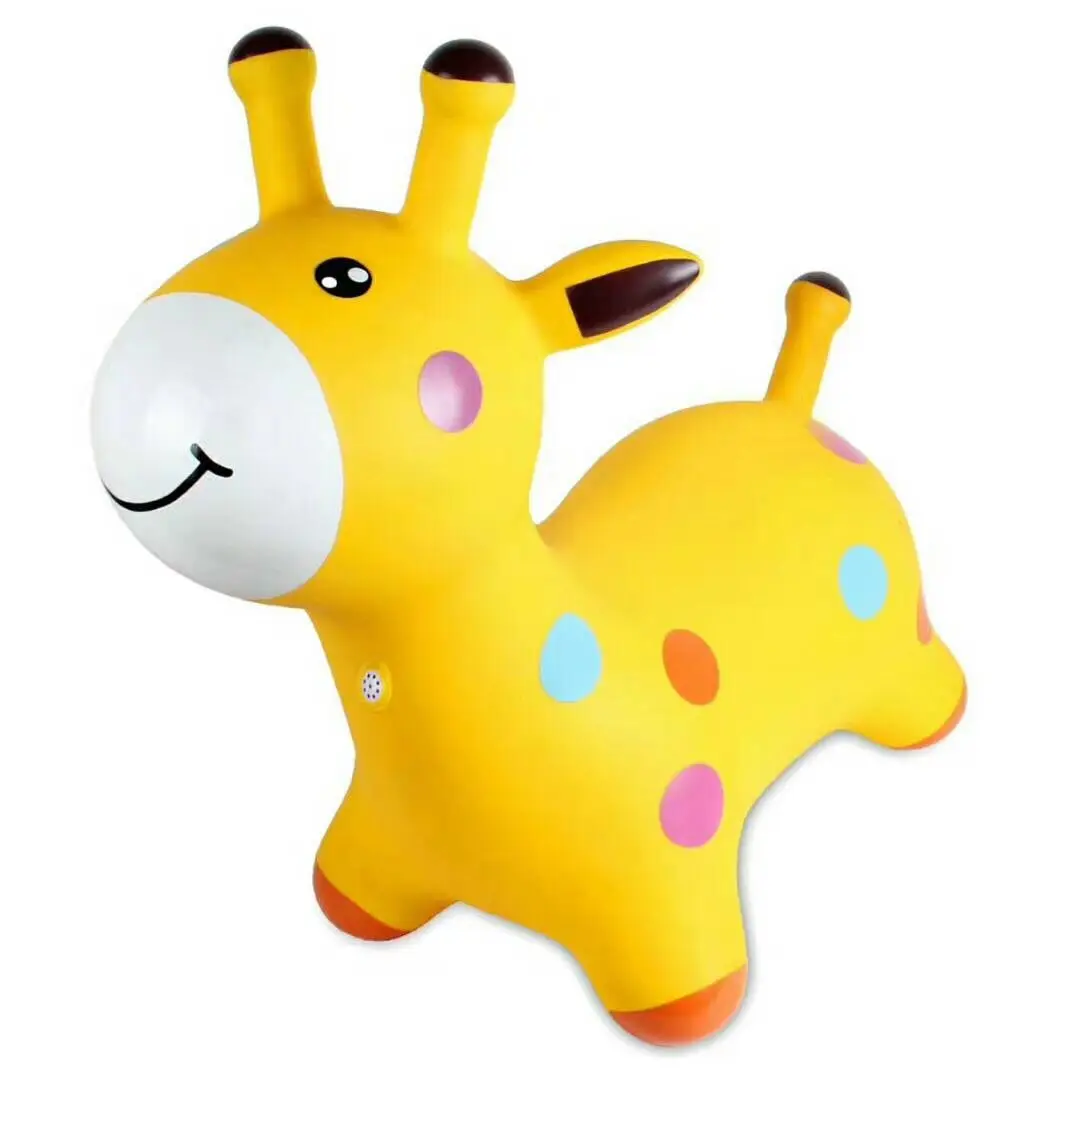 Inflatable Ride On Animal Toys Non-toxic PVC Jumping Horse Colorful Animal Deer Hopper